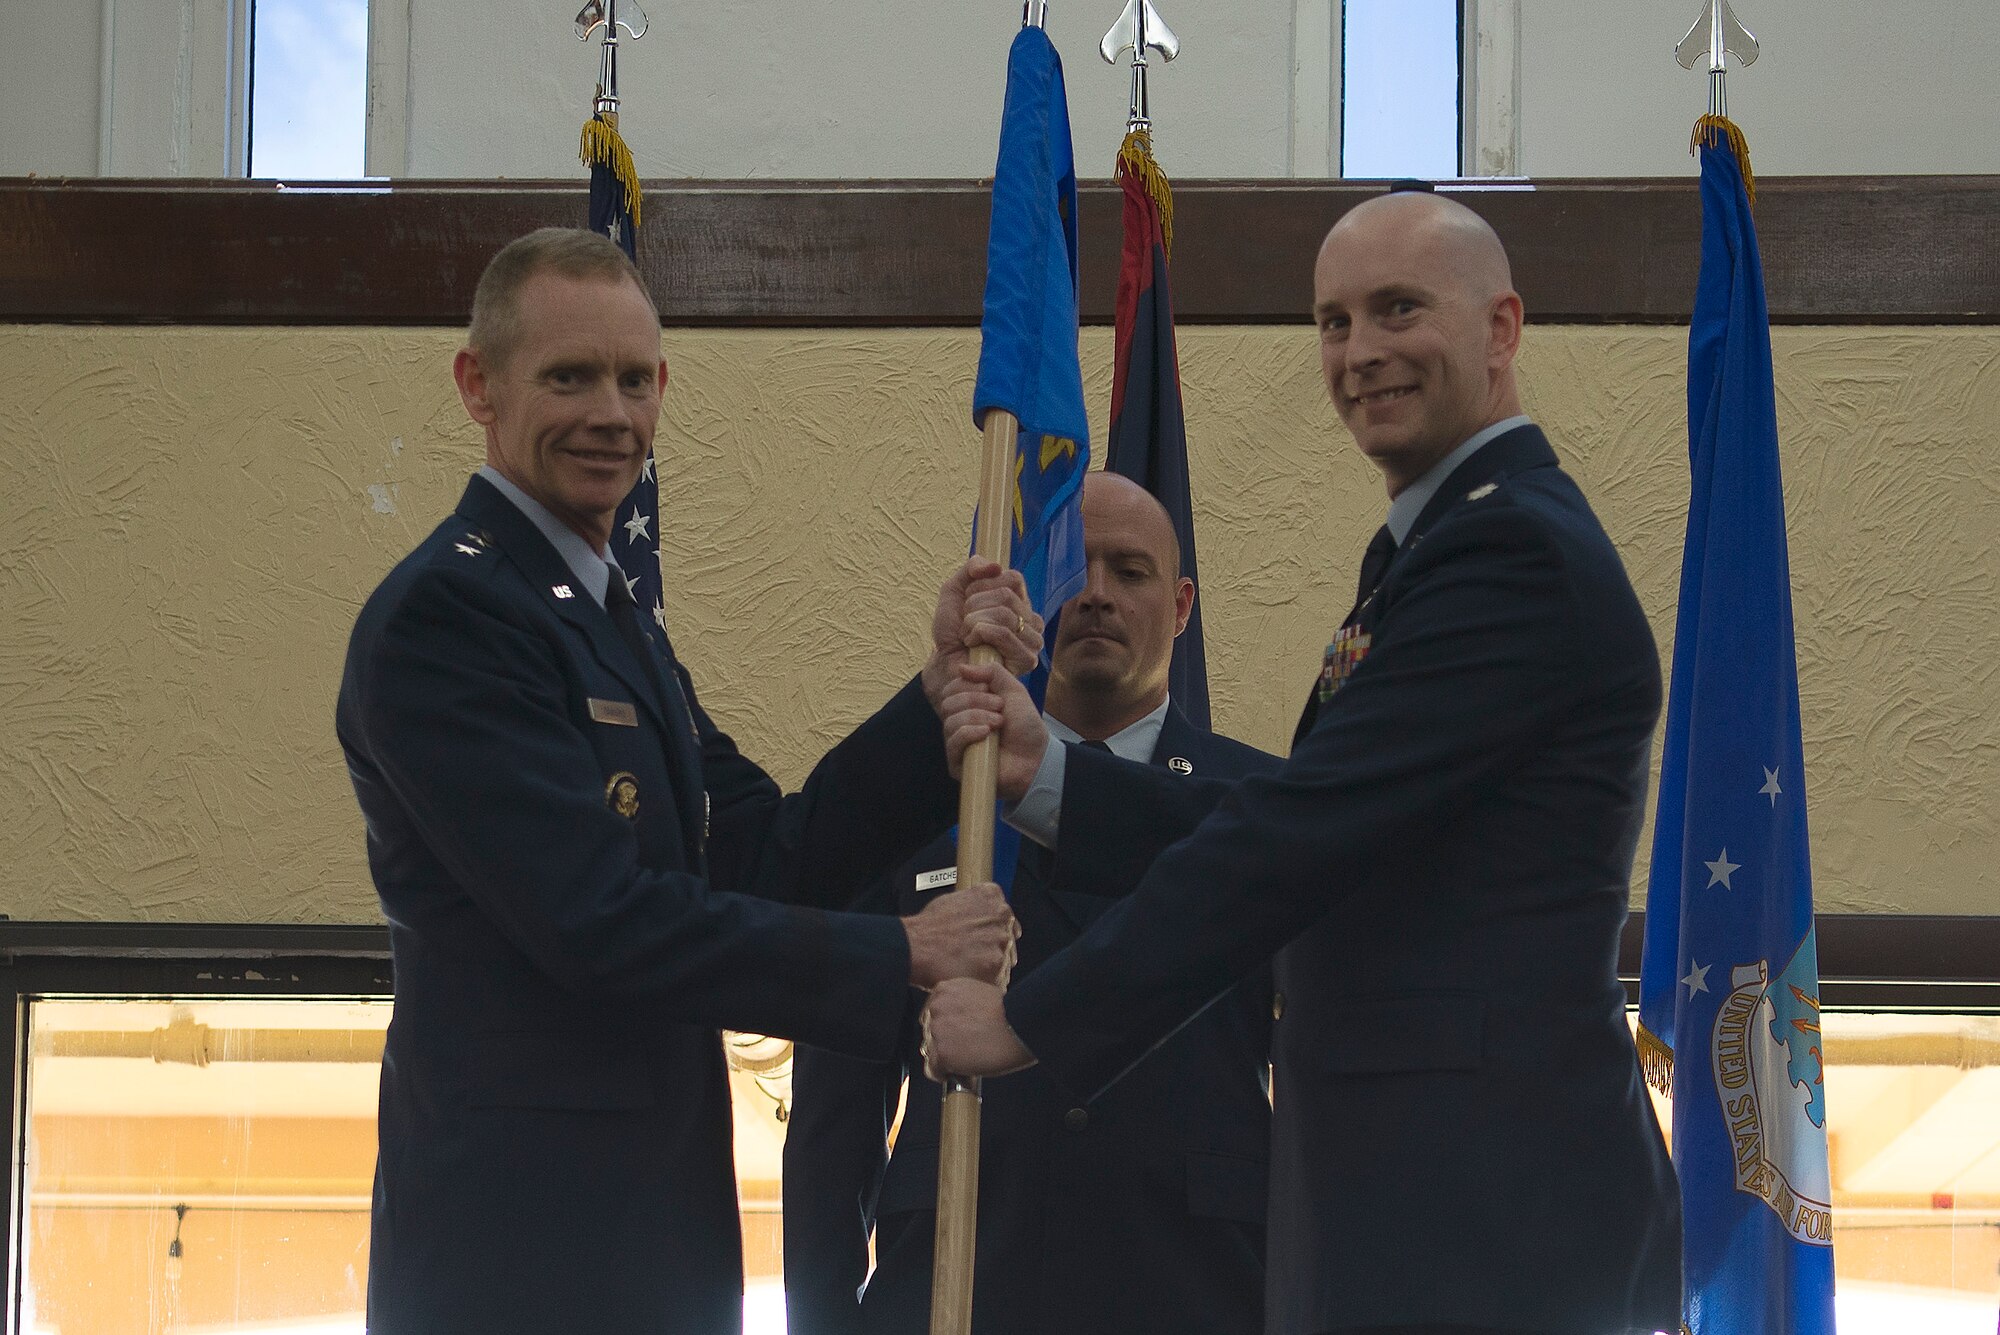 U.S. Air Force Lt. Col. Thomas Moncrief III, right, 8th Air Force Detachment 4 commander, takes the guidon from Maj. Gen. James Dawkins Jr., 8th Air Force and J-GSOC commander, during a change of command ceremony at Guam Air Base, June 28, 2019. Detachment 4 is a detachment under 8th Air Force at Andersen AFB, Guam, established by Air Force Global Strike Command to support bomber efforts in the Indo-Pacific region.   (U.S. Air Force photo by 36th Air Wing Public Affairs)